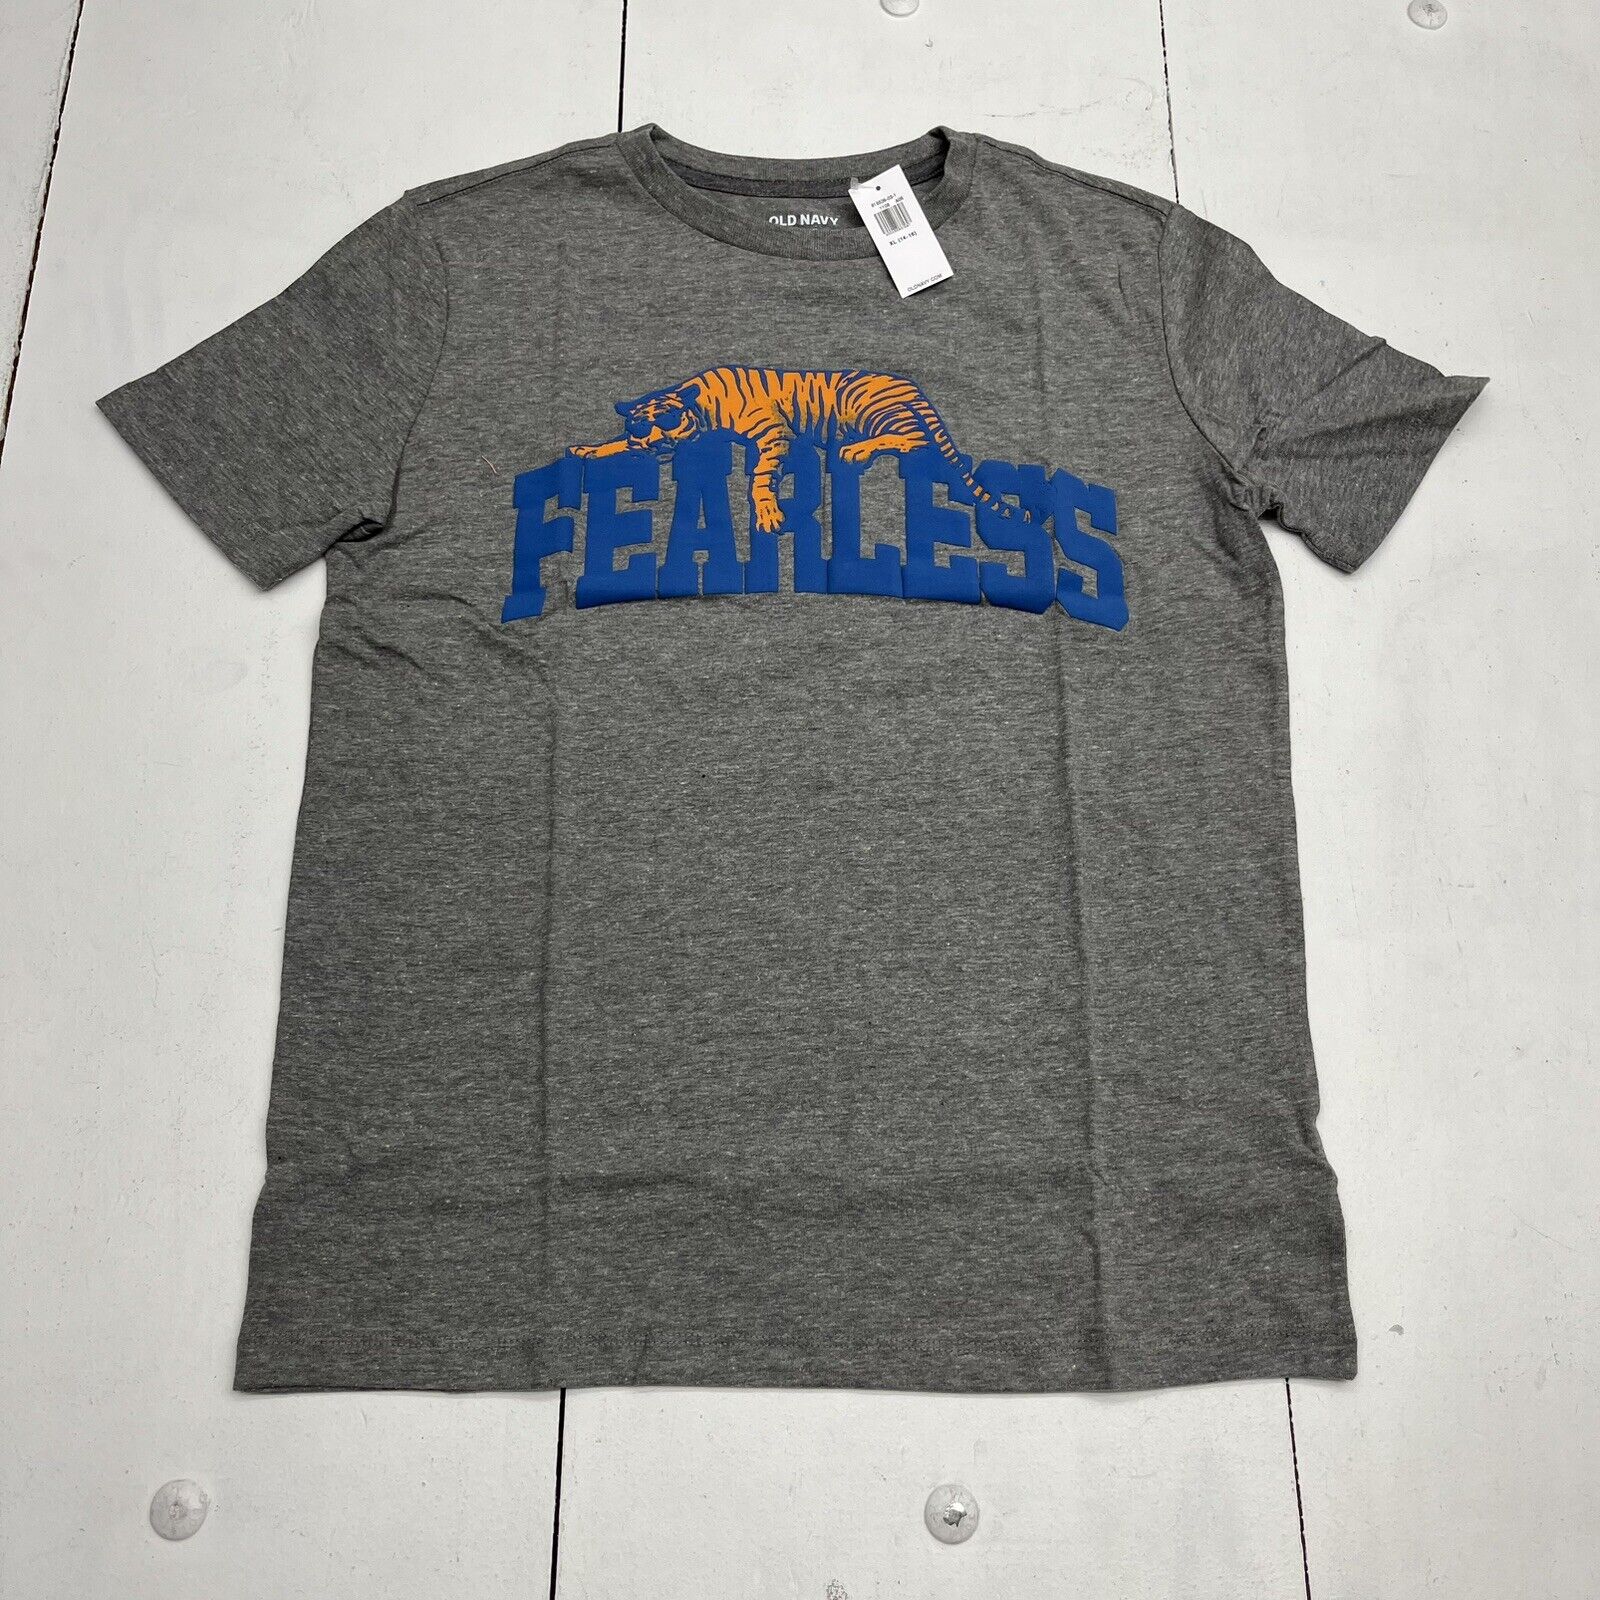 Old Navy Gray Fearless T-Shirt Unisex Kids Size X-Large (14-16) NEW